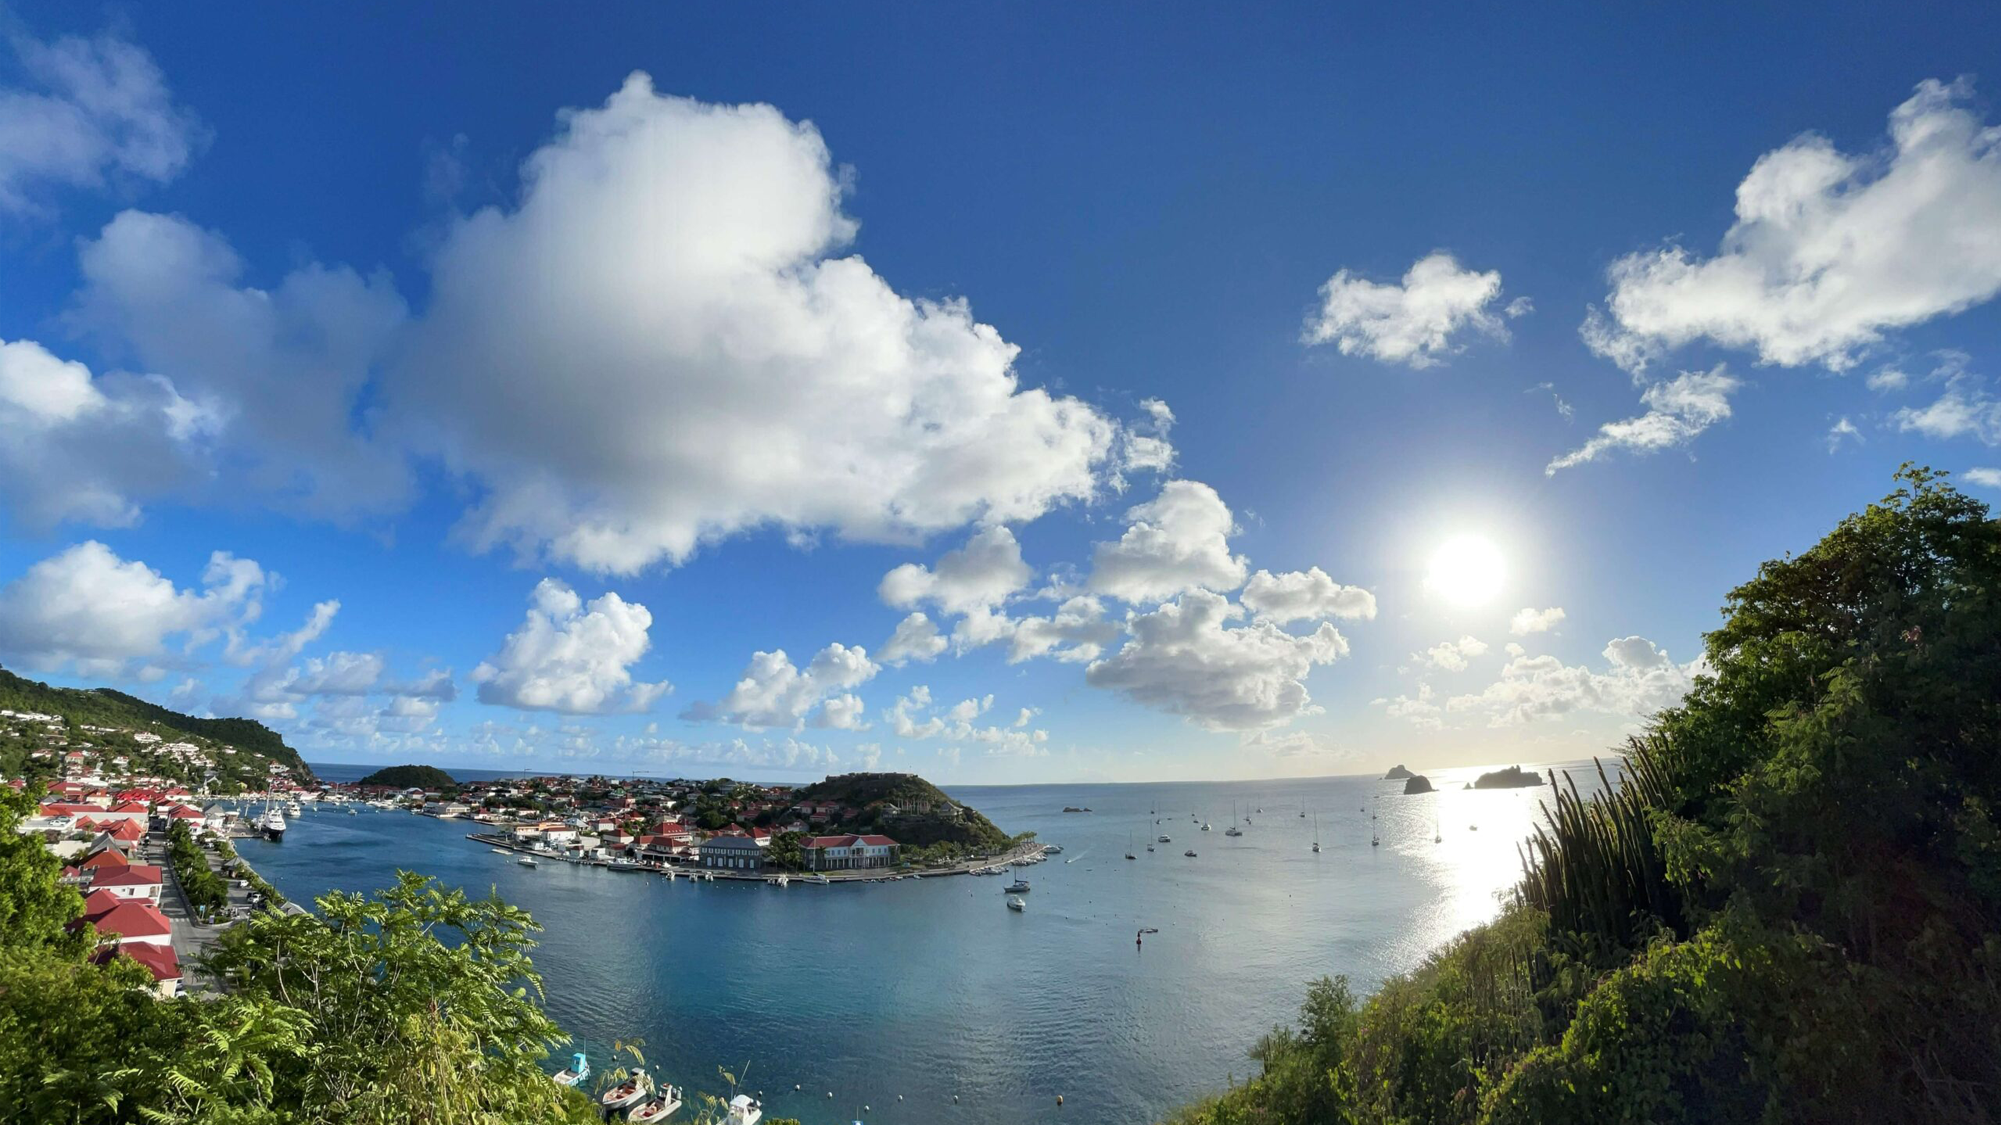 The view before the sunset in Gustavia is world class! Don’t forget the Champagne, wine, etc.